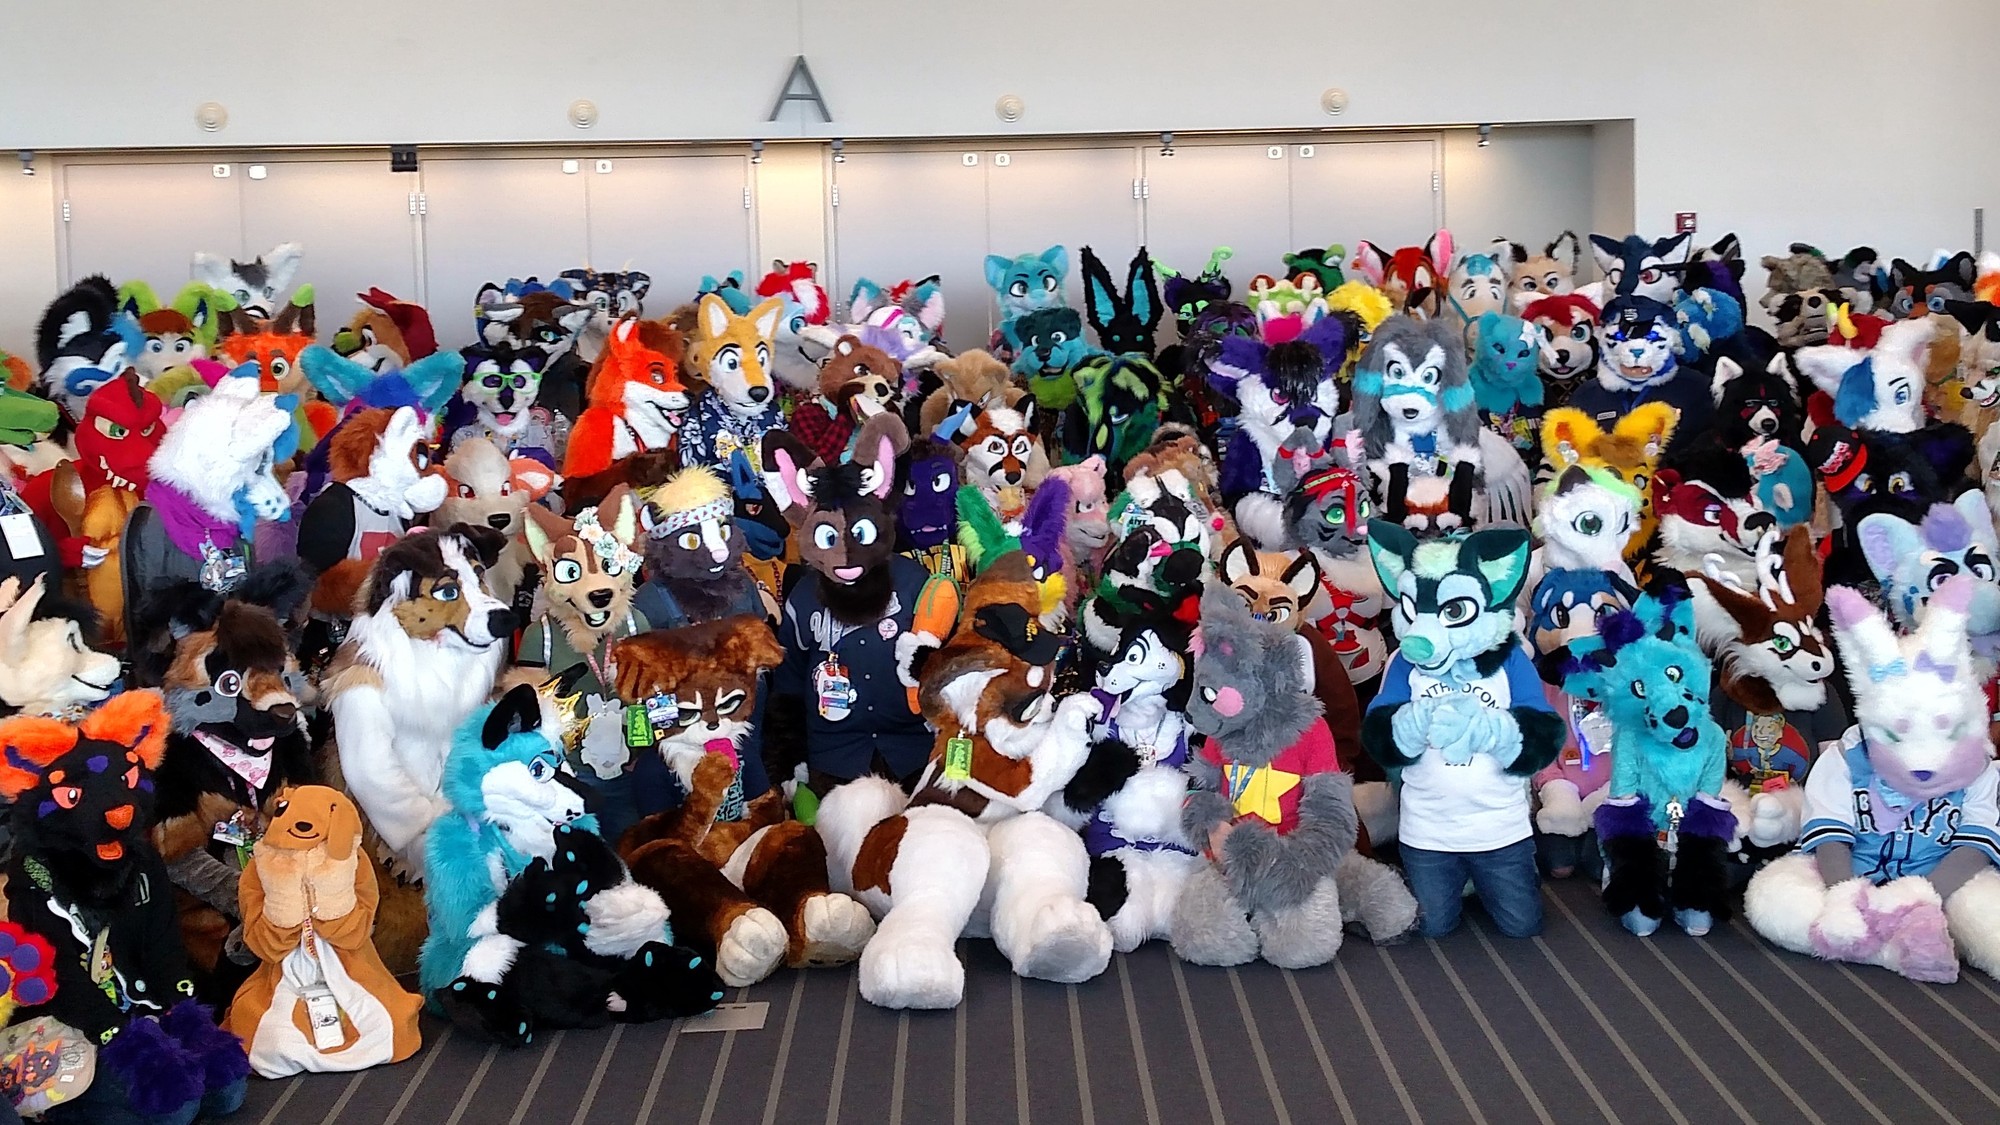 Furries Sex Convention - How the Furry Community Became a Safe Space for Youth - VICE